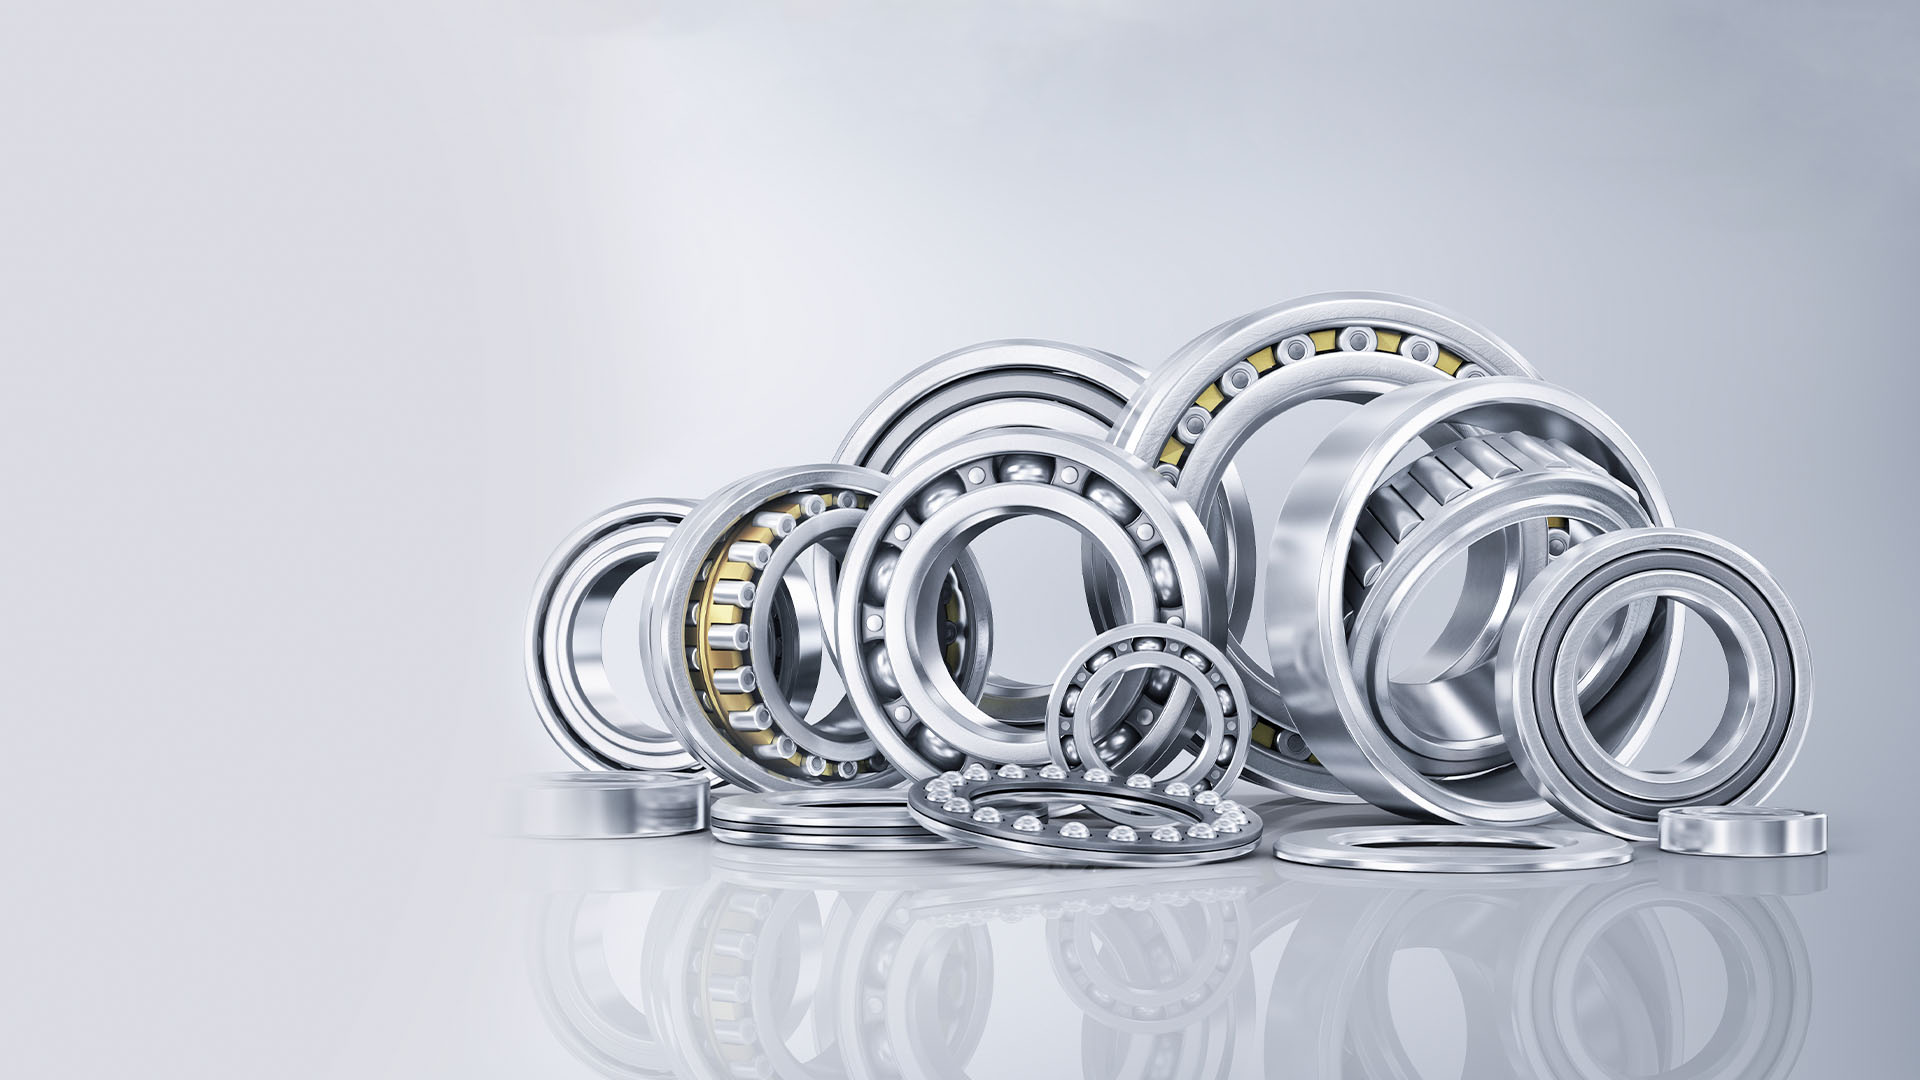 producing more than 50 kinds of bearings within the inner diameter of 3mm to 30mm